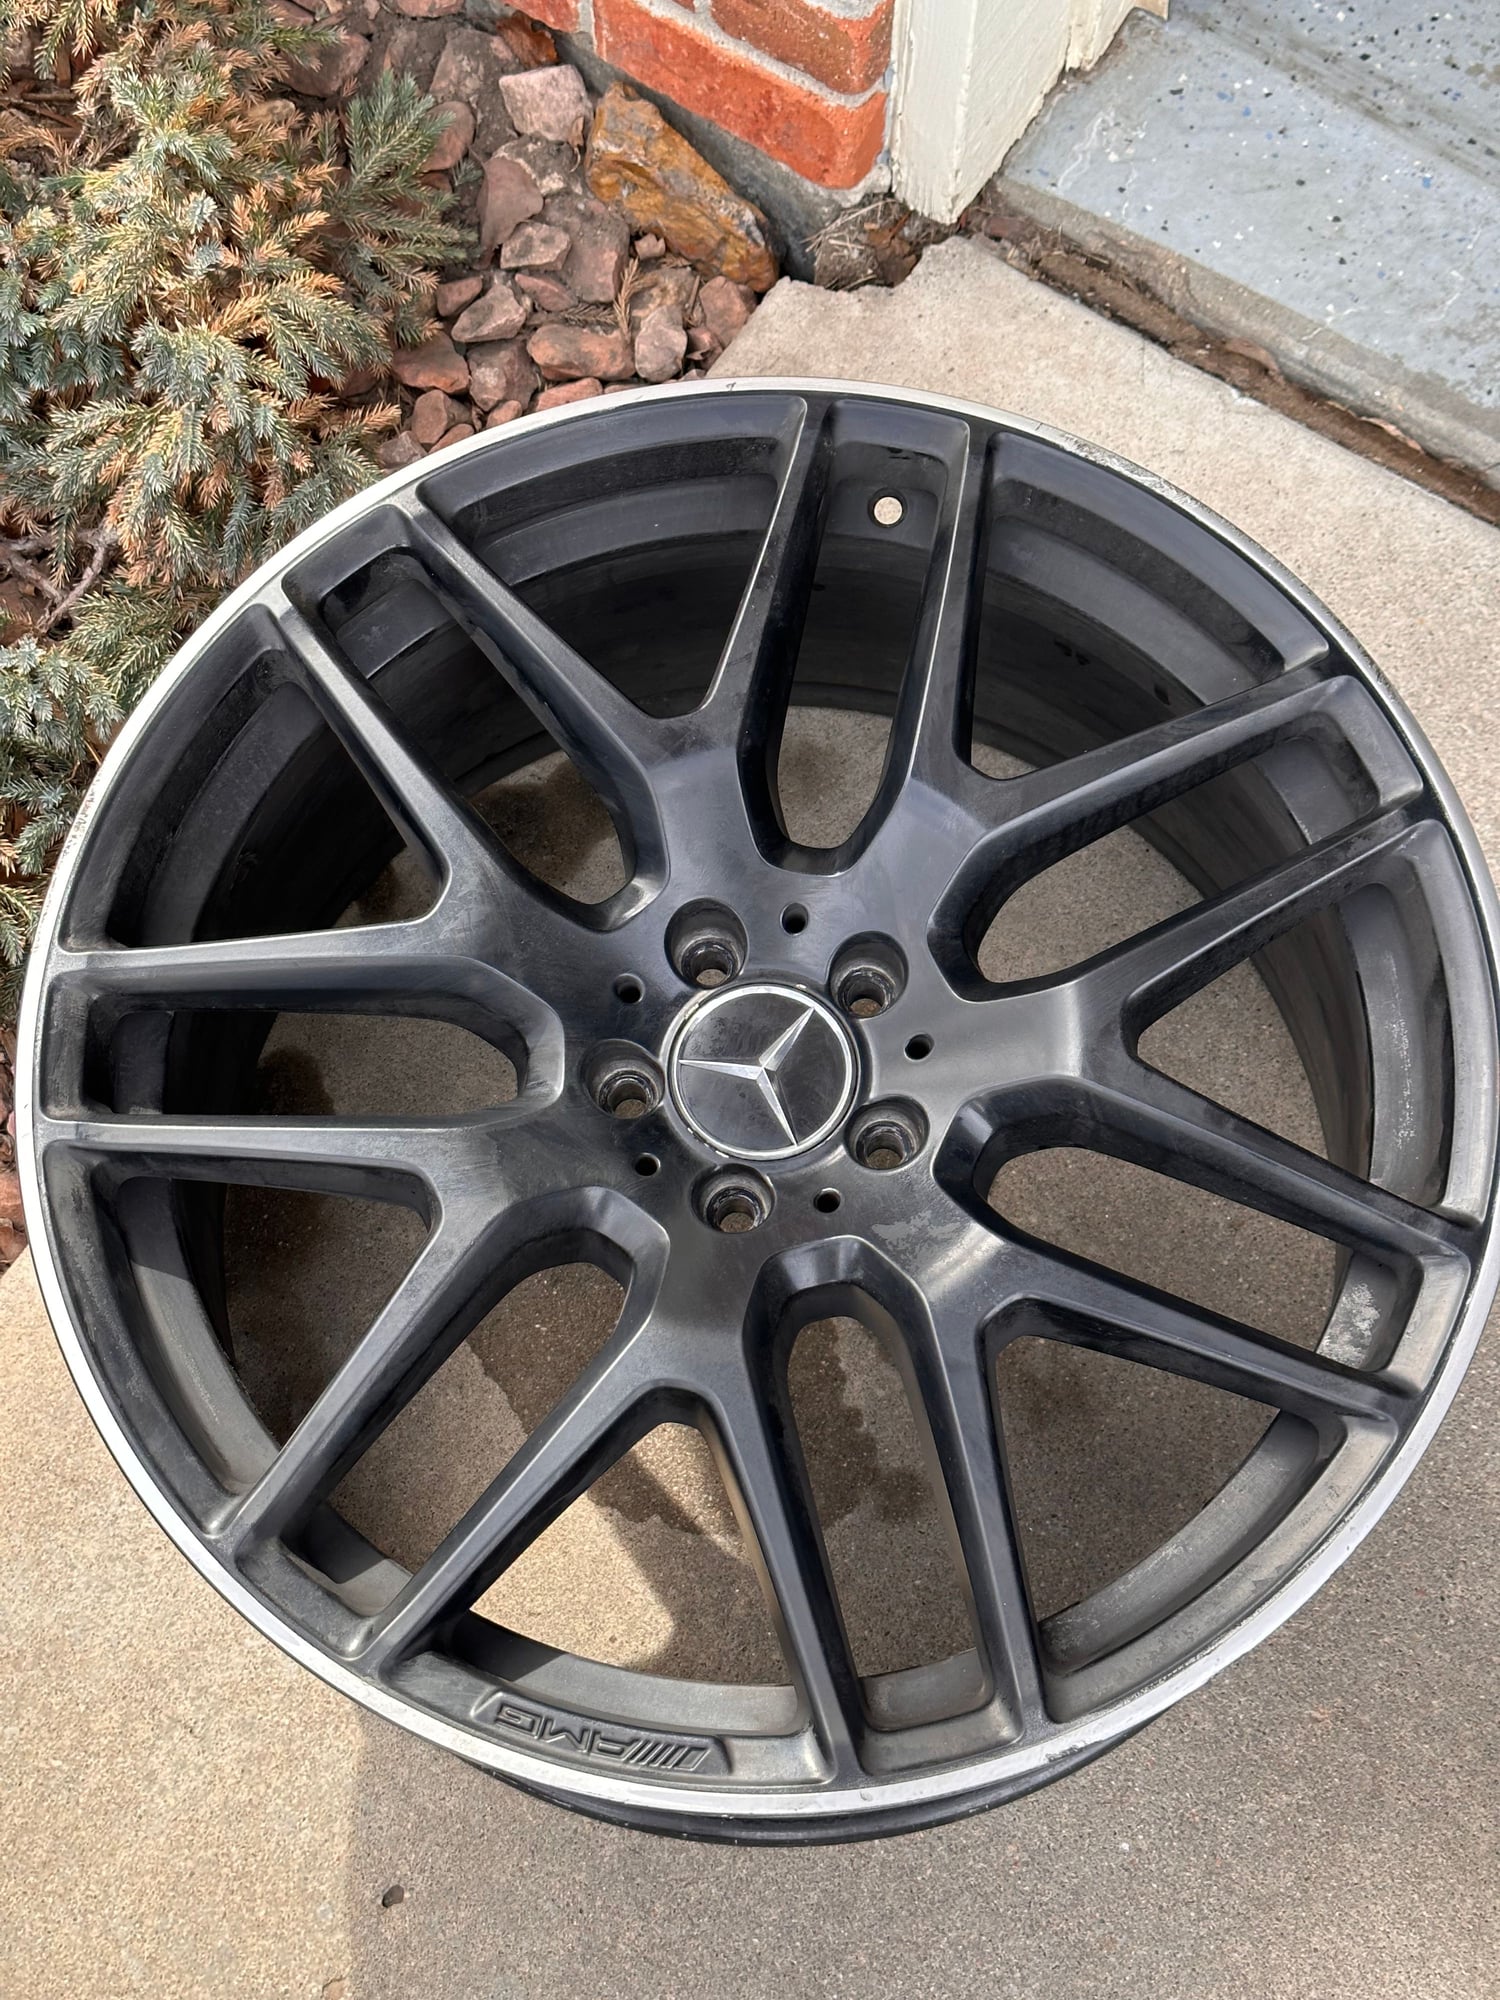 Wheels and Tires/Axles - OEM Mercedes AMG 21x10 Y-spoke matte black wheels W166 -$2500 - Used - 2016 to 2019 Mercedes-Benz GLC63 AMG S - Centennail, CO 80016, United States